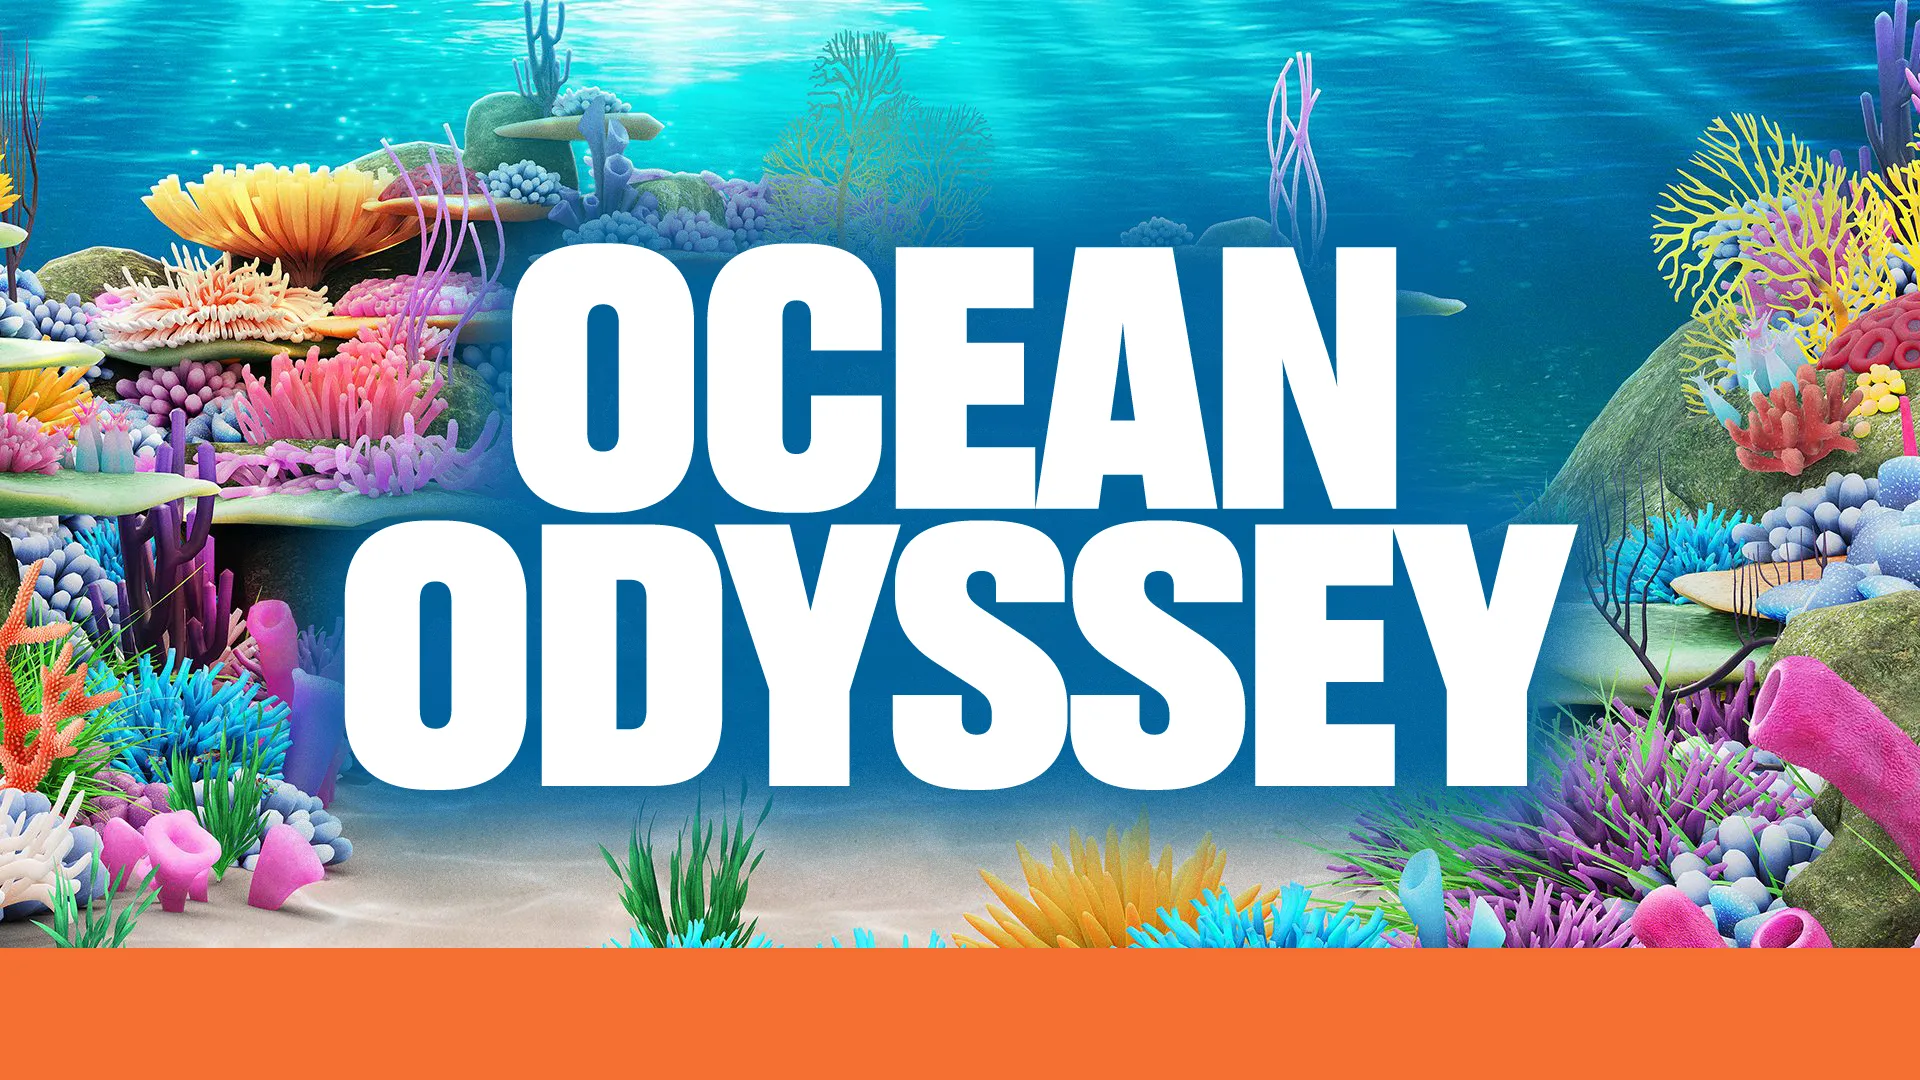 This "Ocean Odyssey" template features a vibrant and immersive design, perfect for promoting church events with an ocean or underwater theme. The colorful coral reef and bold typography create an exciting and adventurous atmosphere, ideal for engaging children and families.